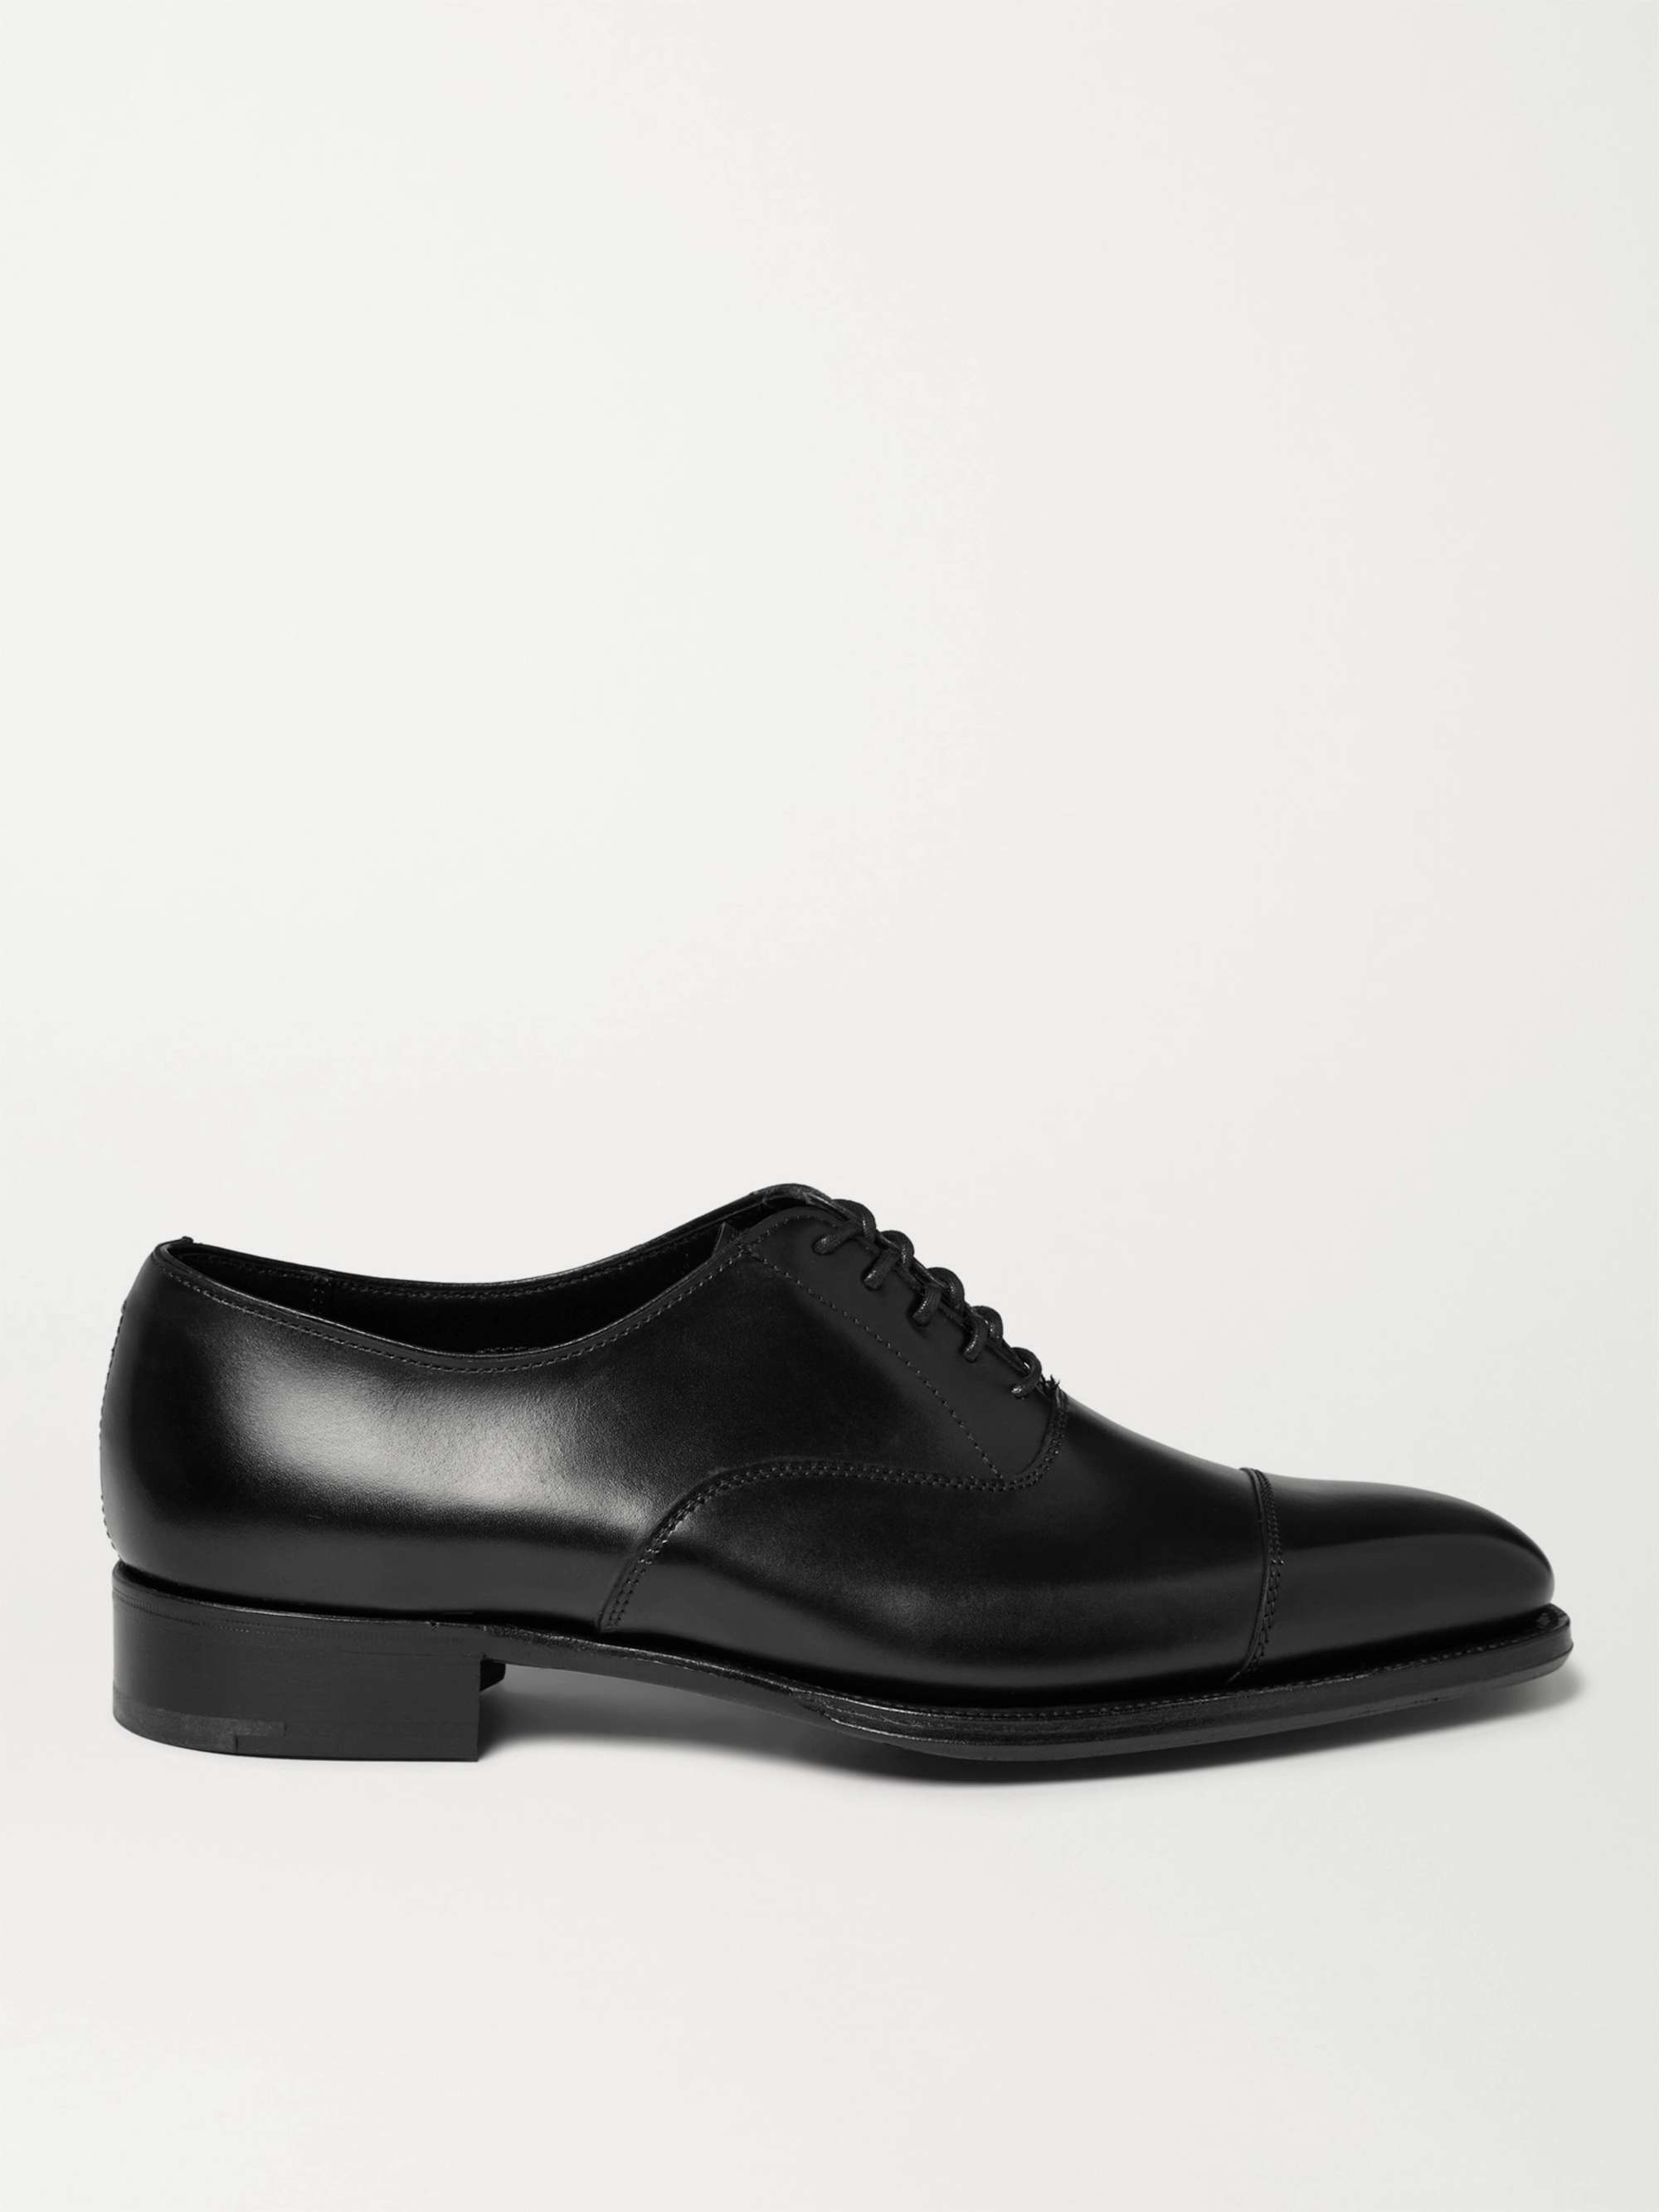 KINGSMAN + George Cleverley Leather Oxford Shoes